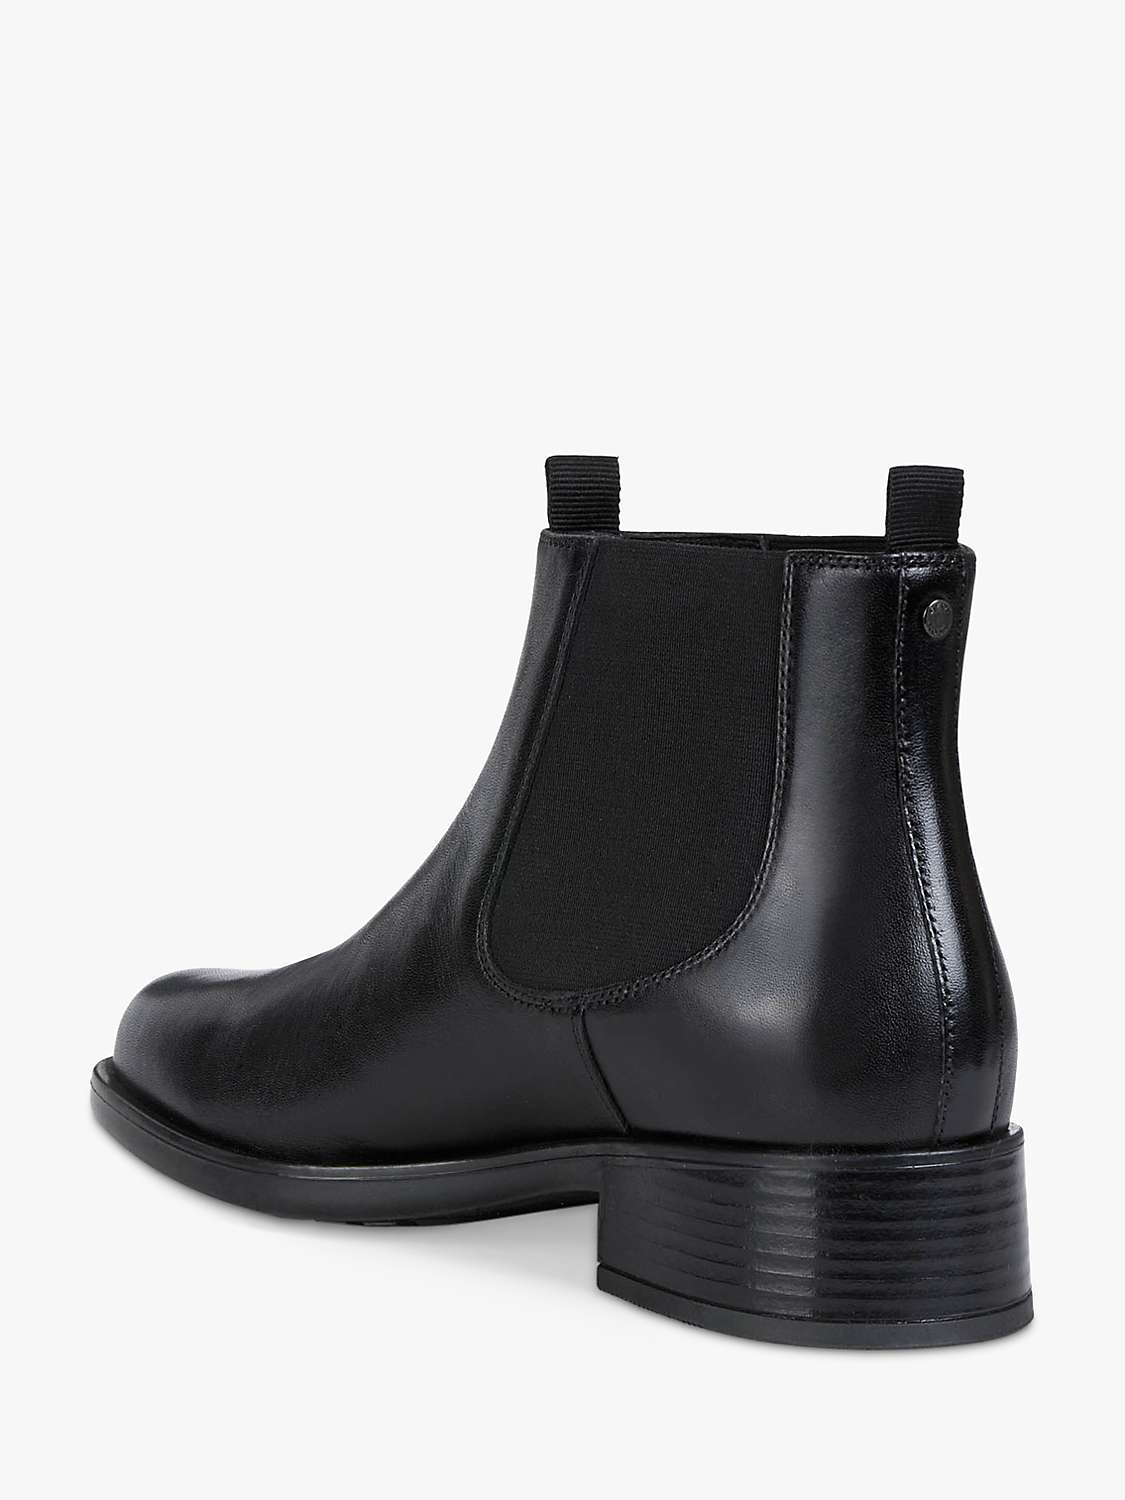 Buy Geox Women's Resia Leather Ankle Boots, Black Online at johnlewis.com